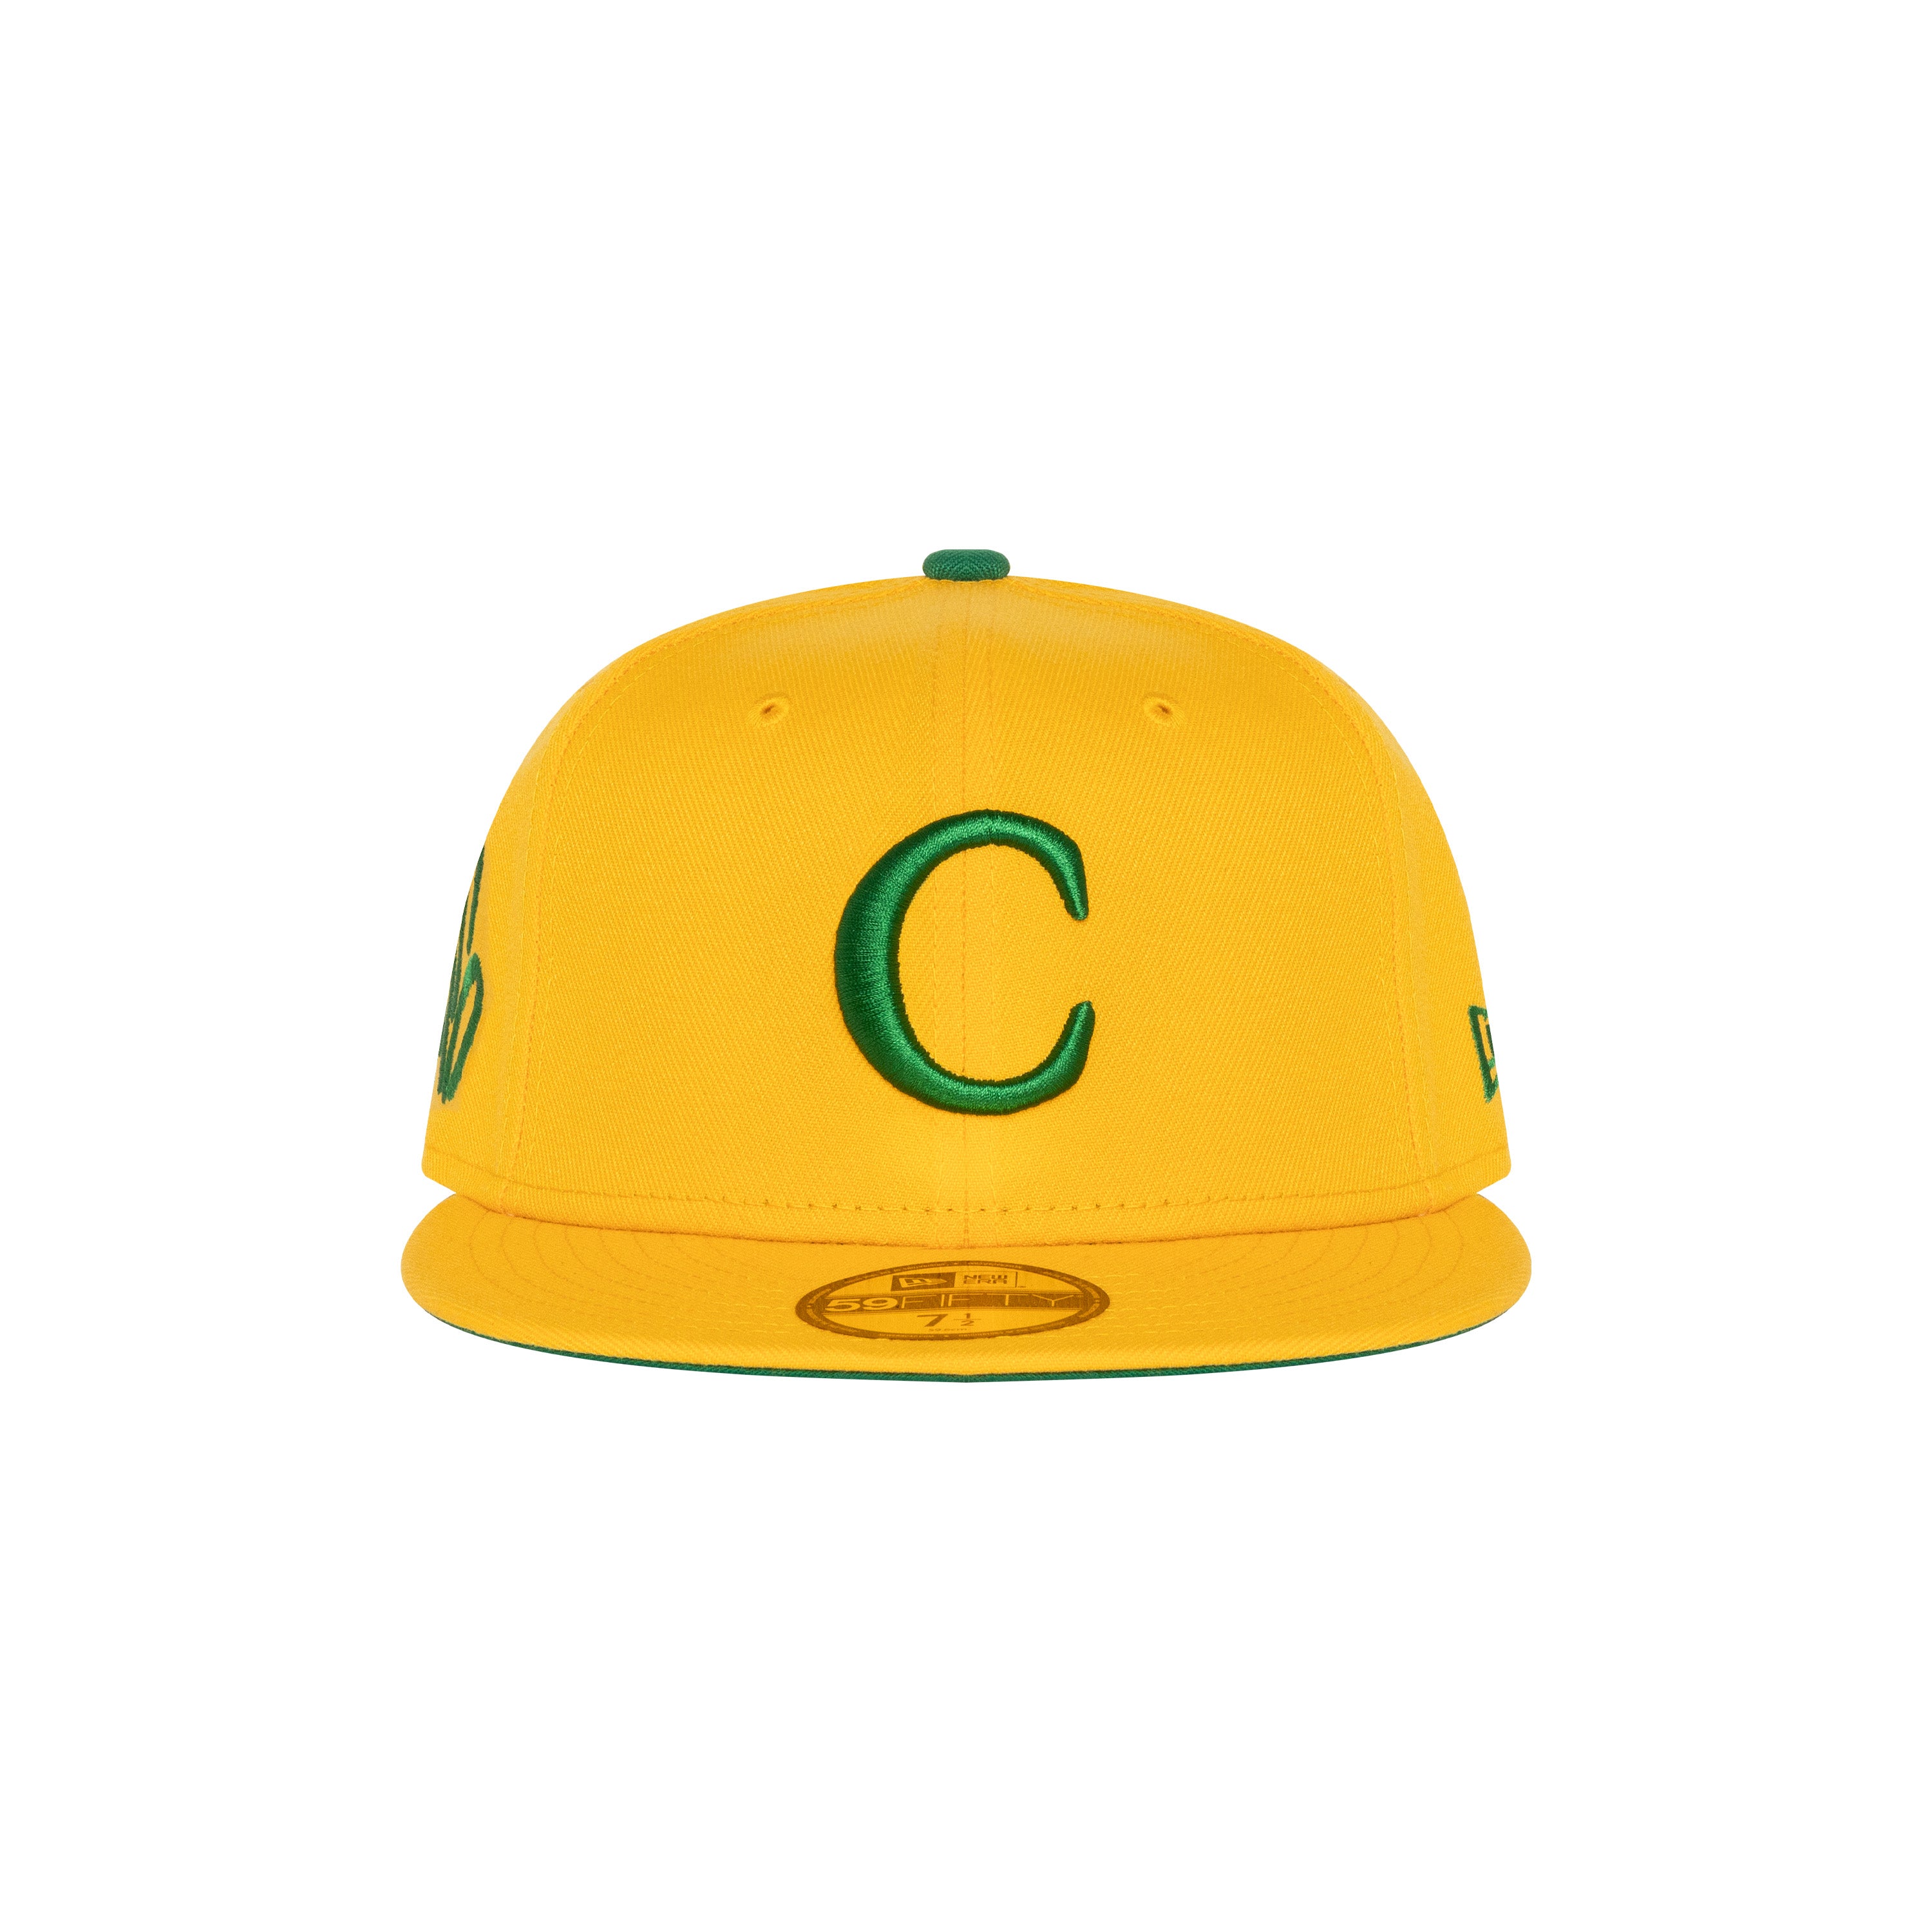 CARROTS STEM FITTED HAT - YELLOW